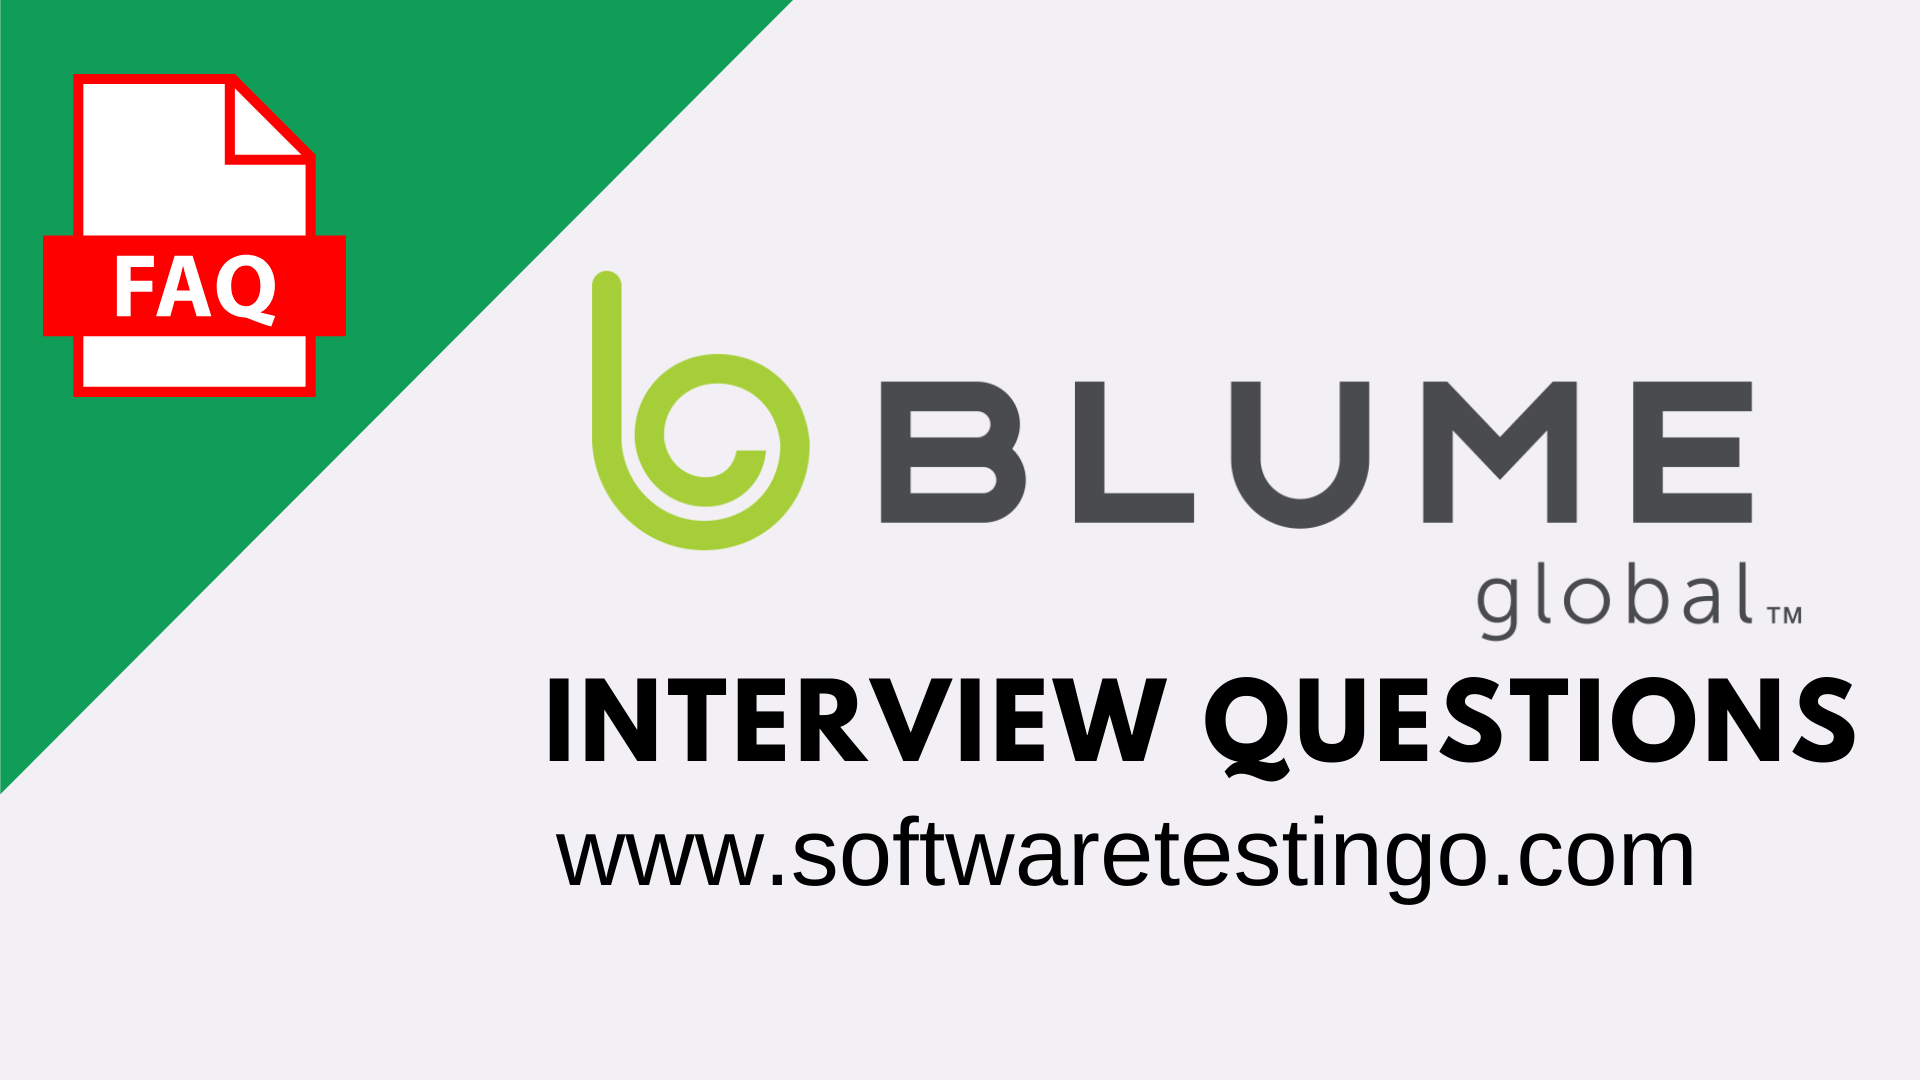 Blume Global Interview Questions